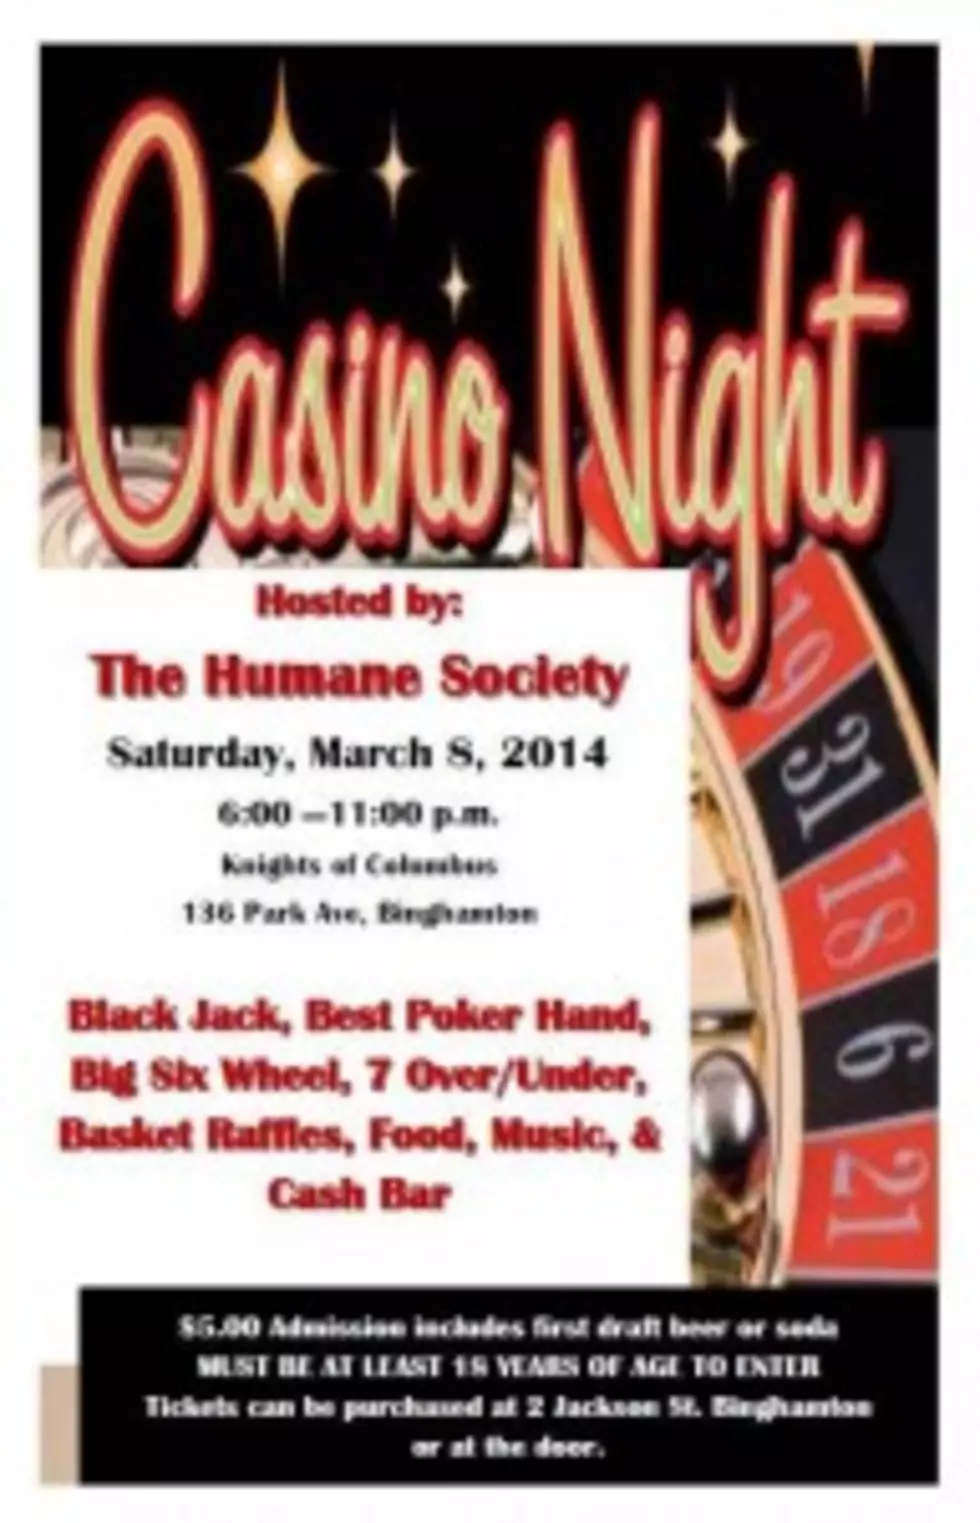 Great Turn Out The Broome County Humane Society&#8217;s Casino Night